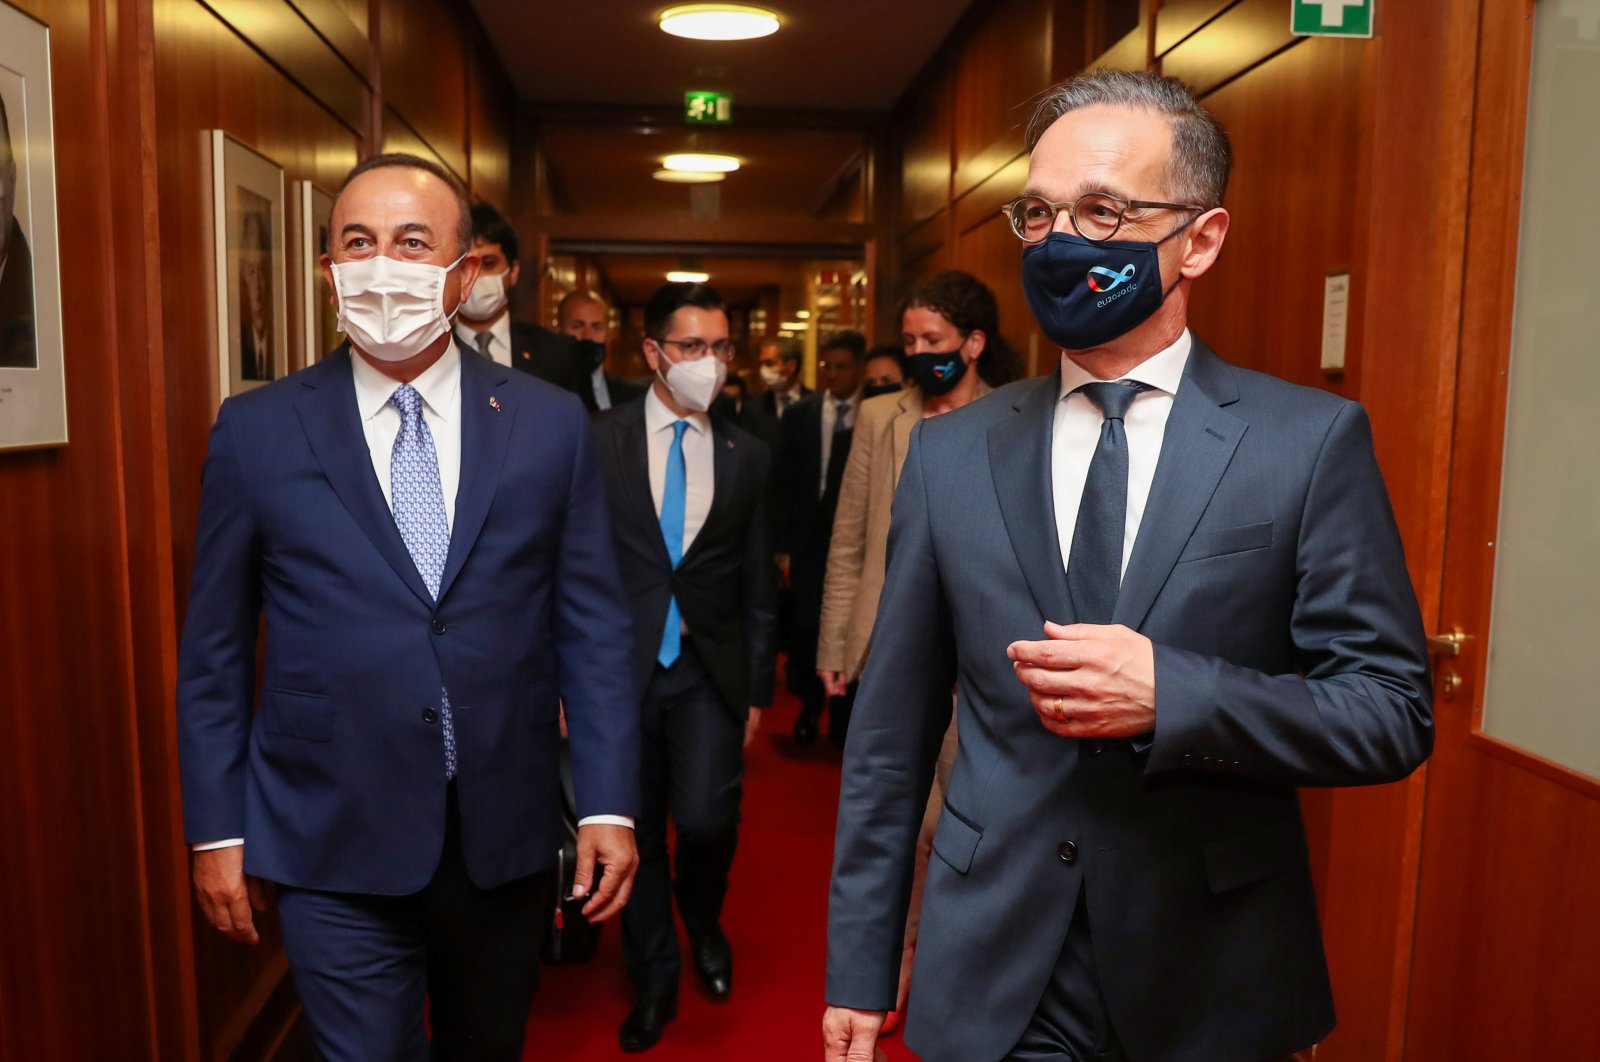 German Foreign Minister Heiko Maas and his Turkish counterpart Mevlut Cavusoglu, wearing protective face masks, walk before their meeting in Berlin, Germany July 2, 2020. (AA Photo)